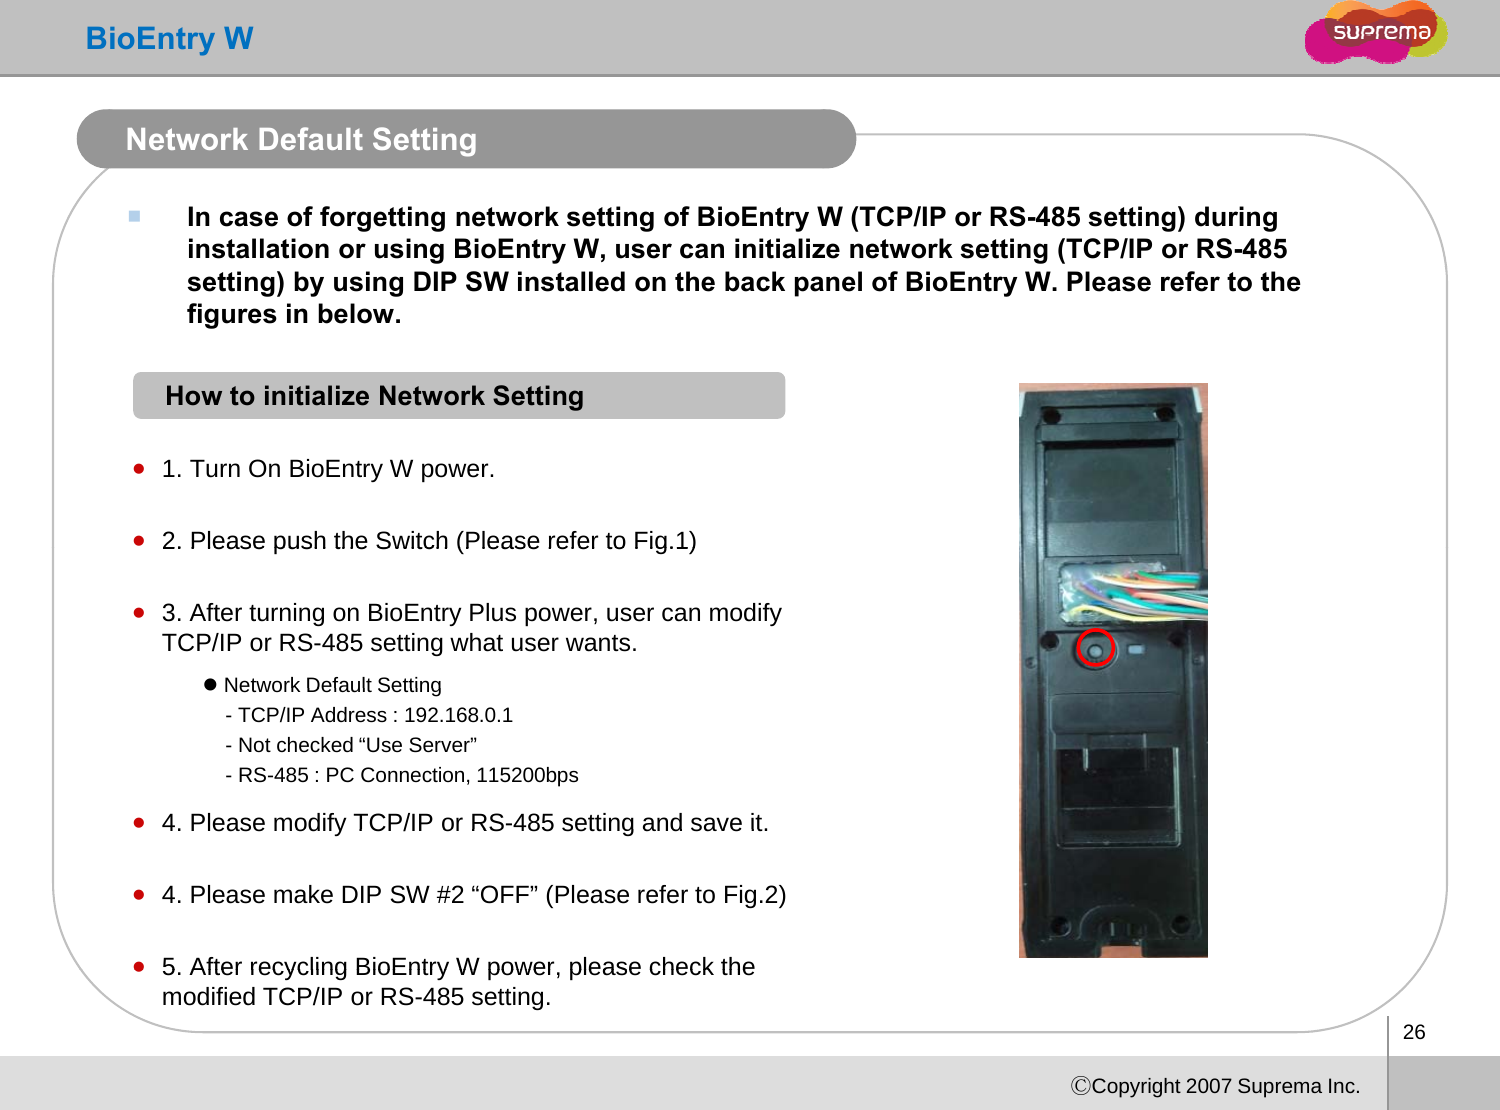 BioEntry WNetwork Default SettingIn case of forgetting network setting of BioEntry W (TCP/IP or RS-485 setting) during installation or using BioEntry W, user can initialize network setting (TCP/IP or RS-485 setting) by using DIP SW installed on the back panel of BioEntry W. Please refer to the figures in below.How to initialize Network Settinggz1. Turn On BioEntry W power.z2. Please push the Switch (Please refer to Fig.1)2. Please push the Switch (Please refer to Fig.1)z3. After turning on BioEntry Plus power, user can modify TCP/IP or RS-485 setting what user wants. zNetwork Default Settingz4Please modify TCP/IP or RS-485 setting and save itzNetwork Default Setting- TCP/IP Address : 192.168.0.1- Not checked “Use Server”- RS-485 : PC Connection, 115200bps4. Please modify TCP/IP or RS485 setting and save it.z4. Please make DIP SW #2 “OFF” (Please refer to Fig.2)z5 After recyclingBioEntryW power please check the26ⒸCopyright 2007 Suprema Inc.z5. After recycling BioEntryW power, please check the modified TCP/IP or RS-485 setting. 